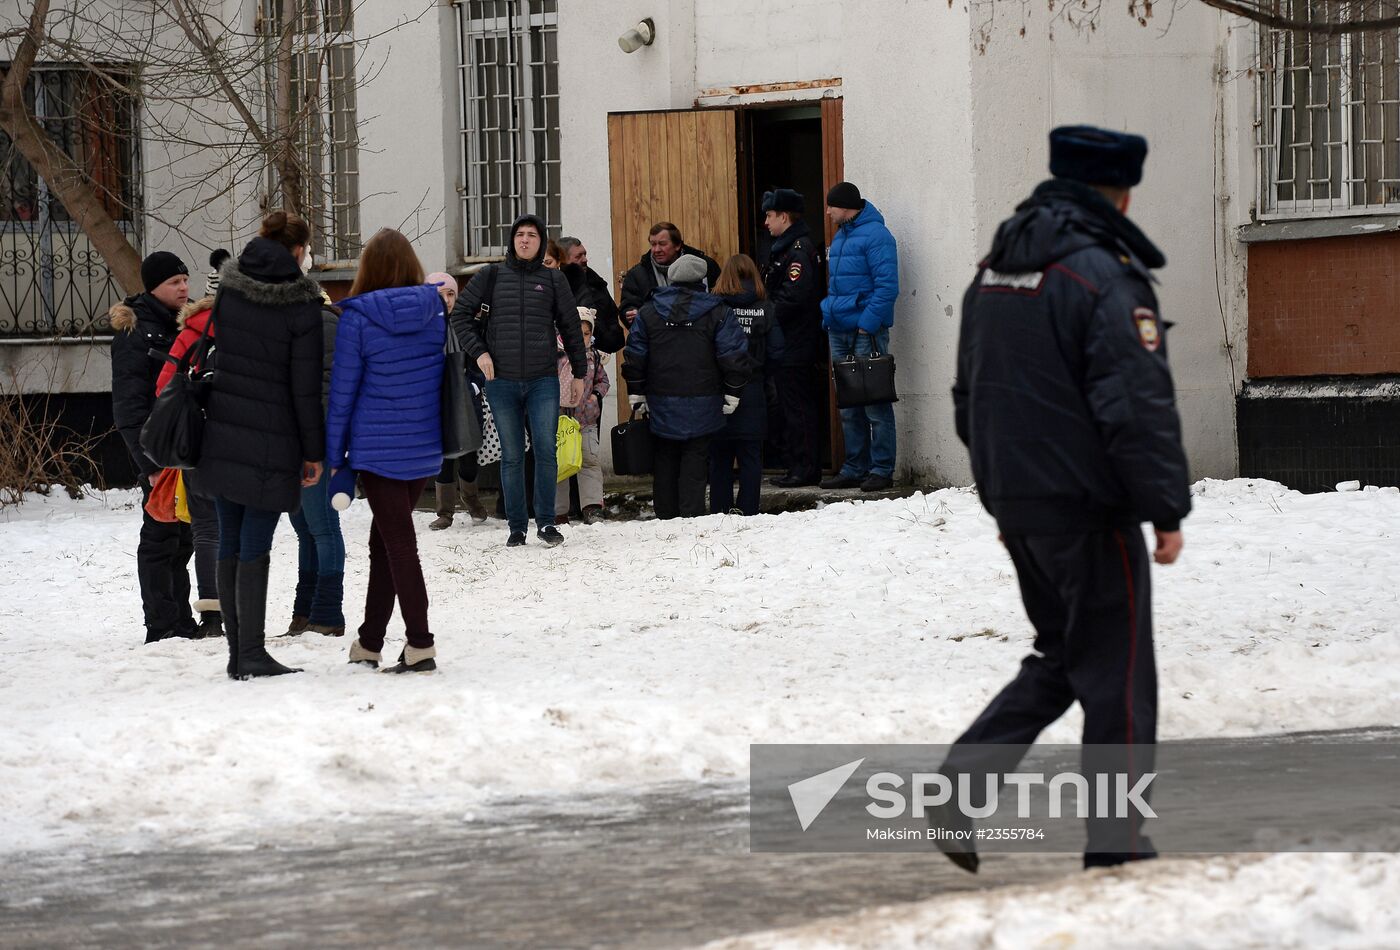 Gunman opens fire at Moscow school